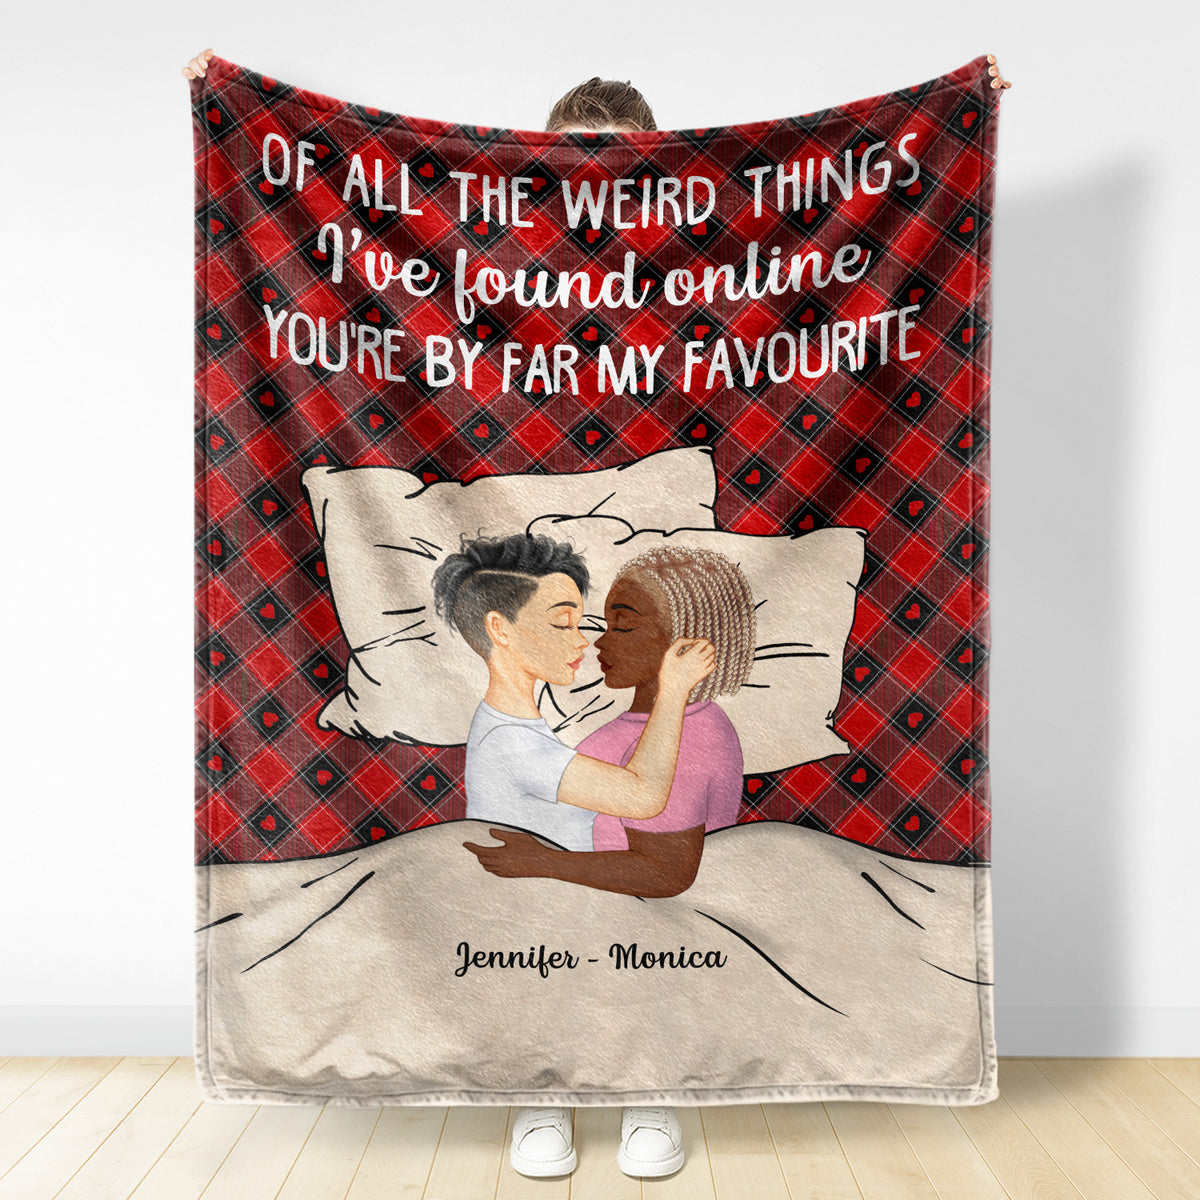 Personalized Photo Blanket - My Favorite Things